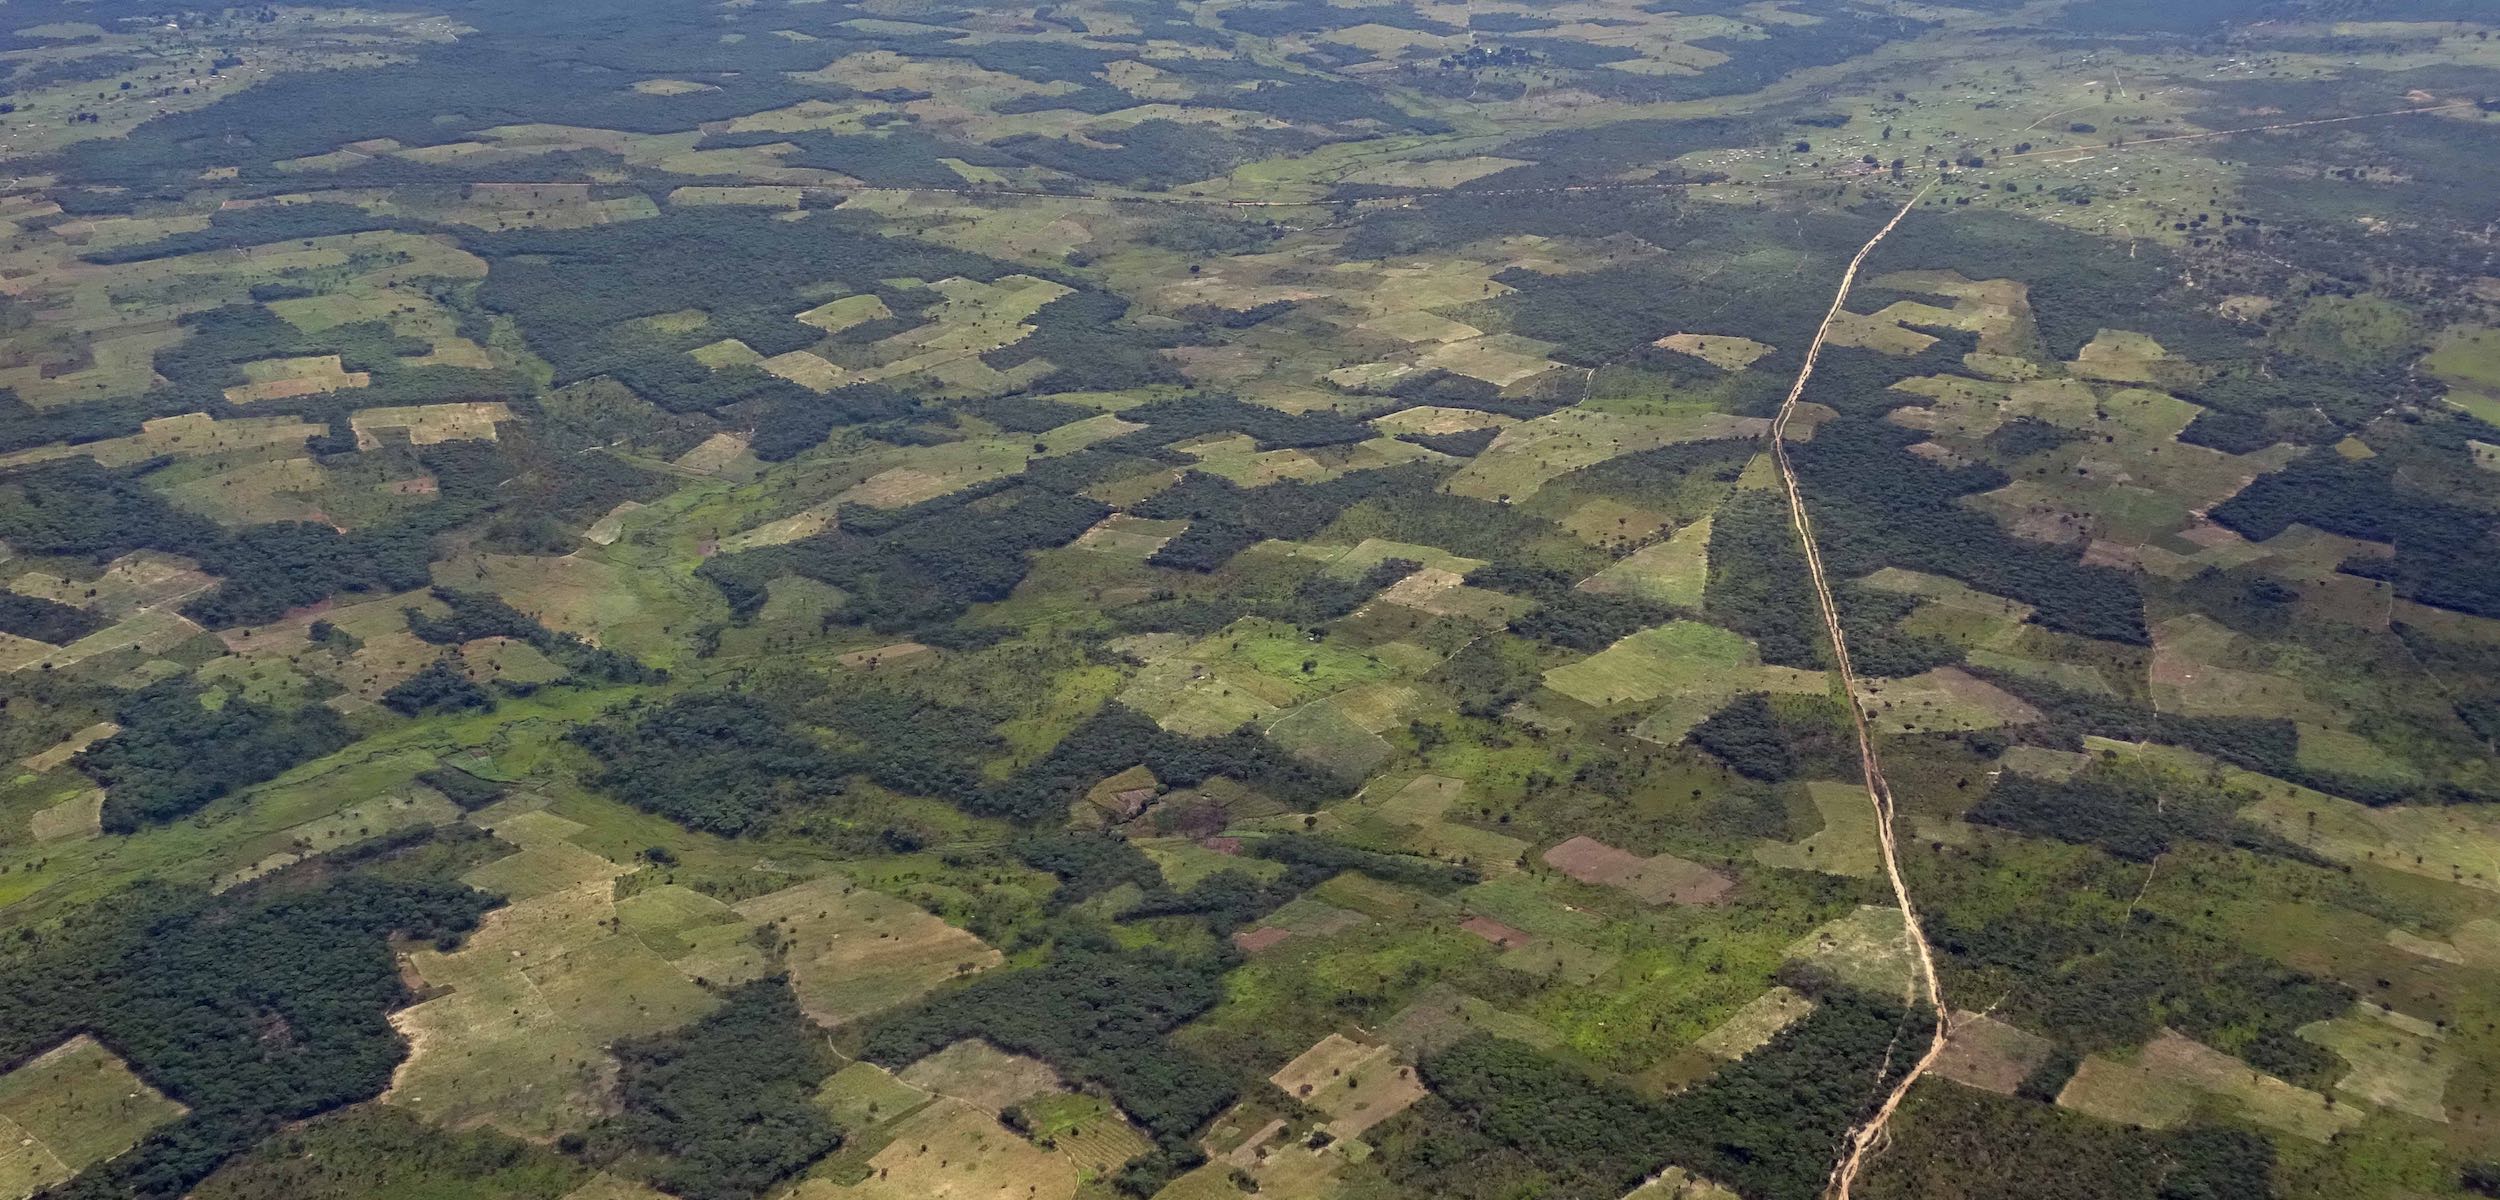 An aerial view of rural Africa showing uneven patches of fields and bush.